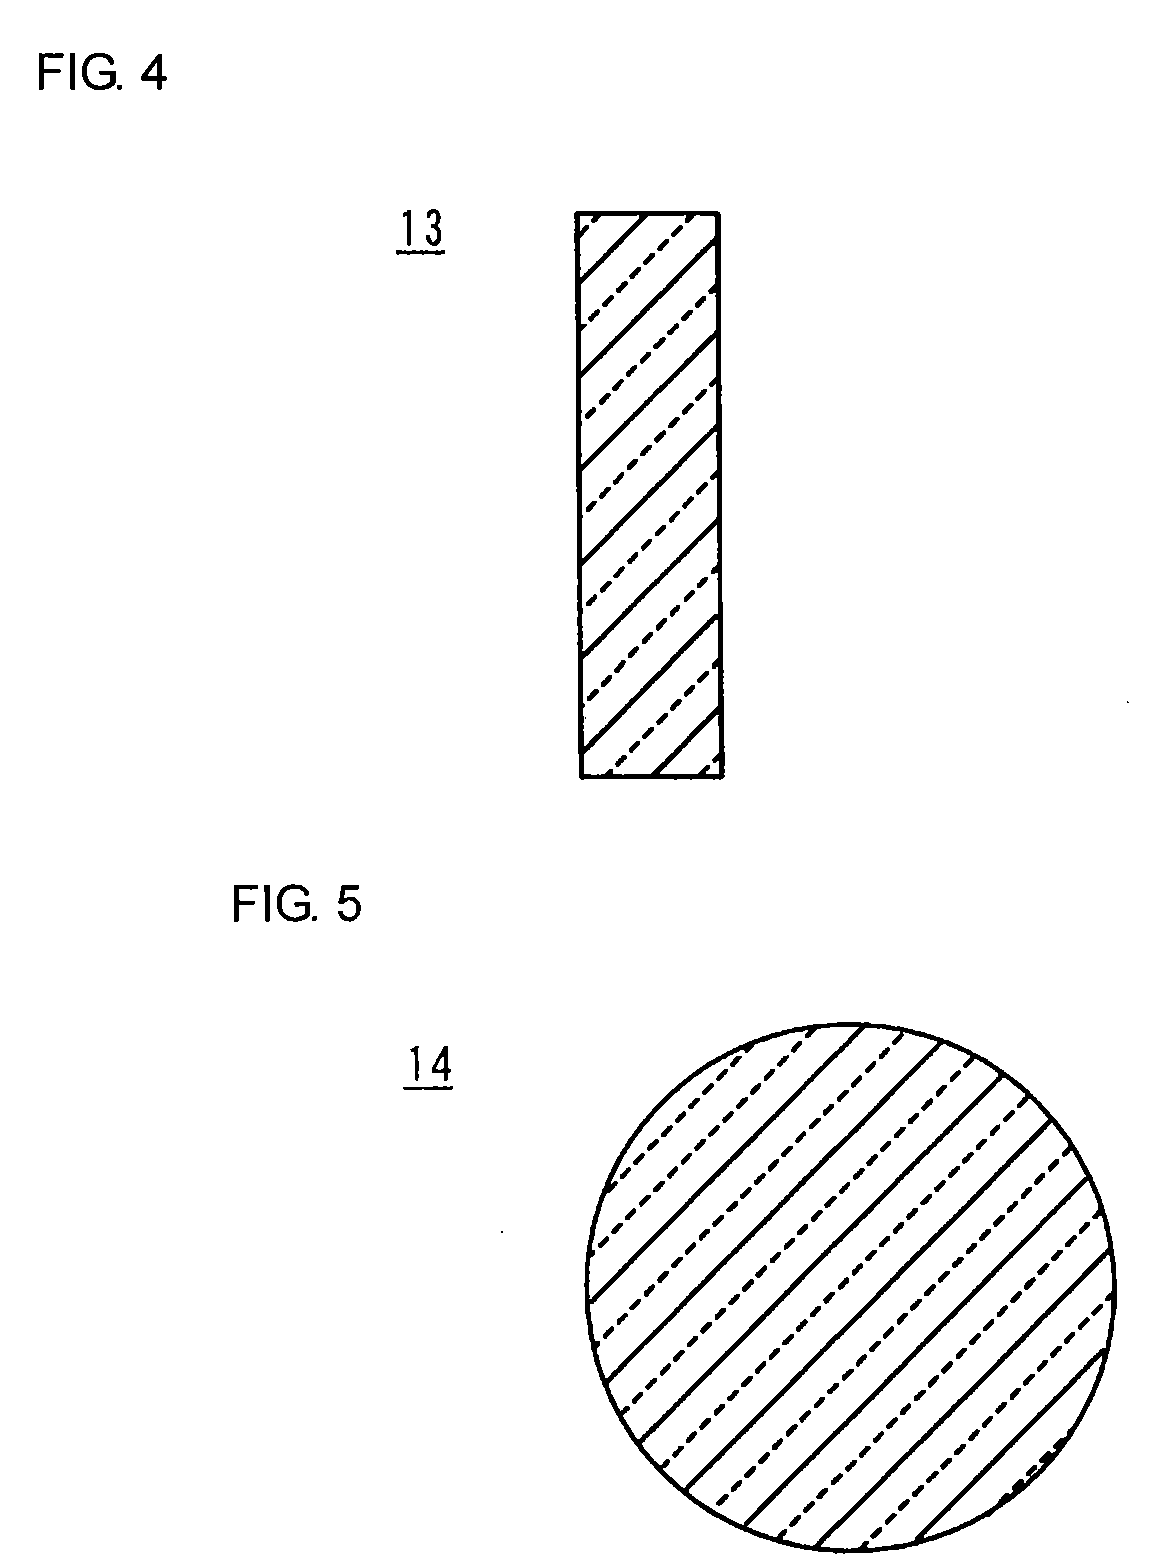 Translucent ceramic, method for producing the same, optical component, and optical device